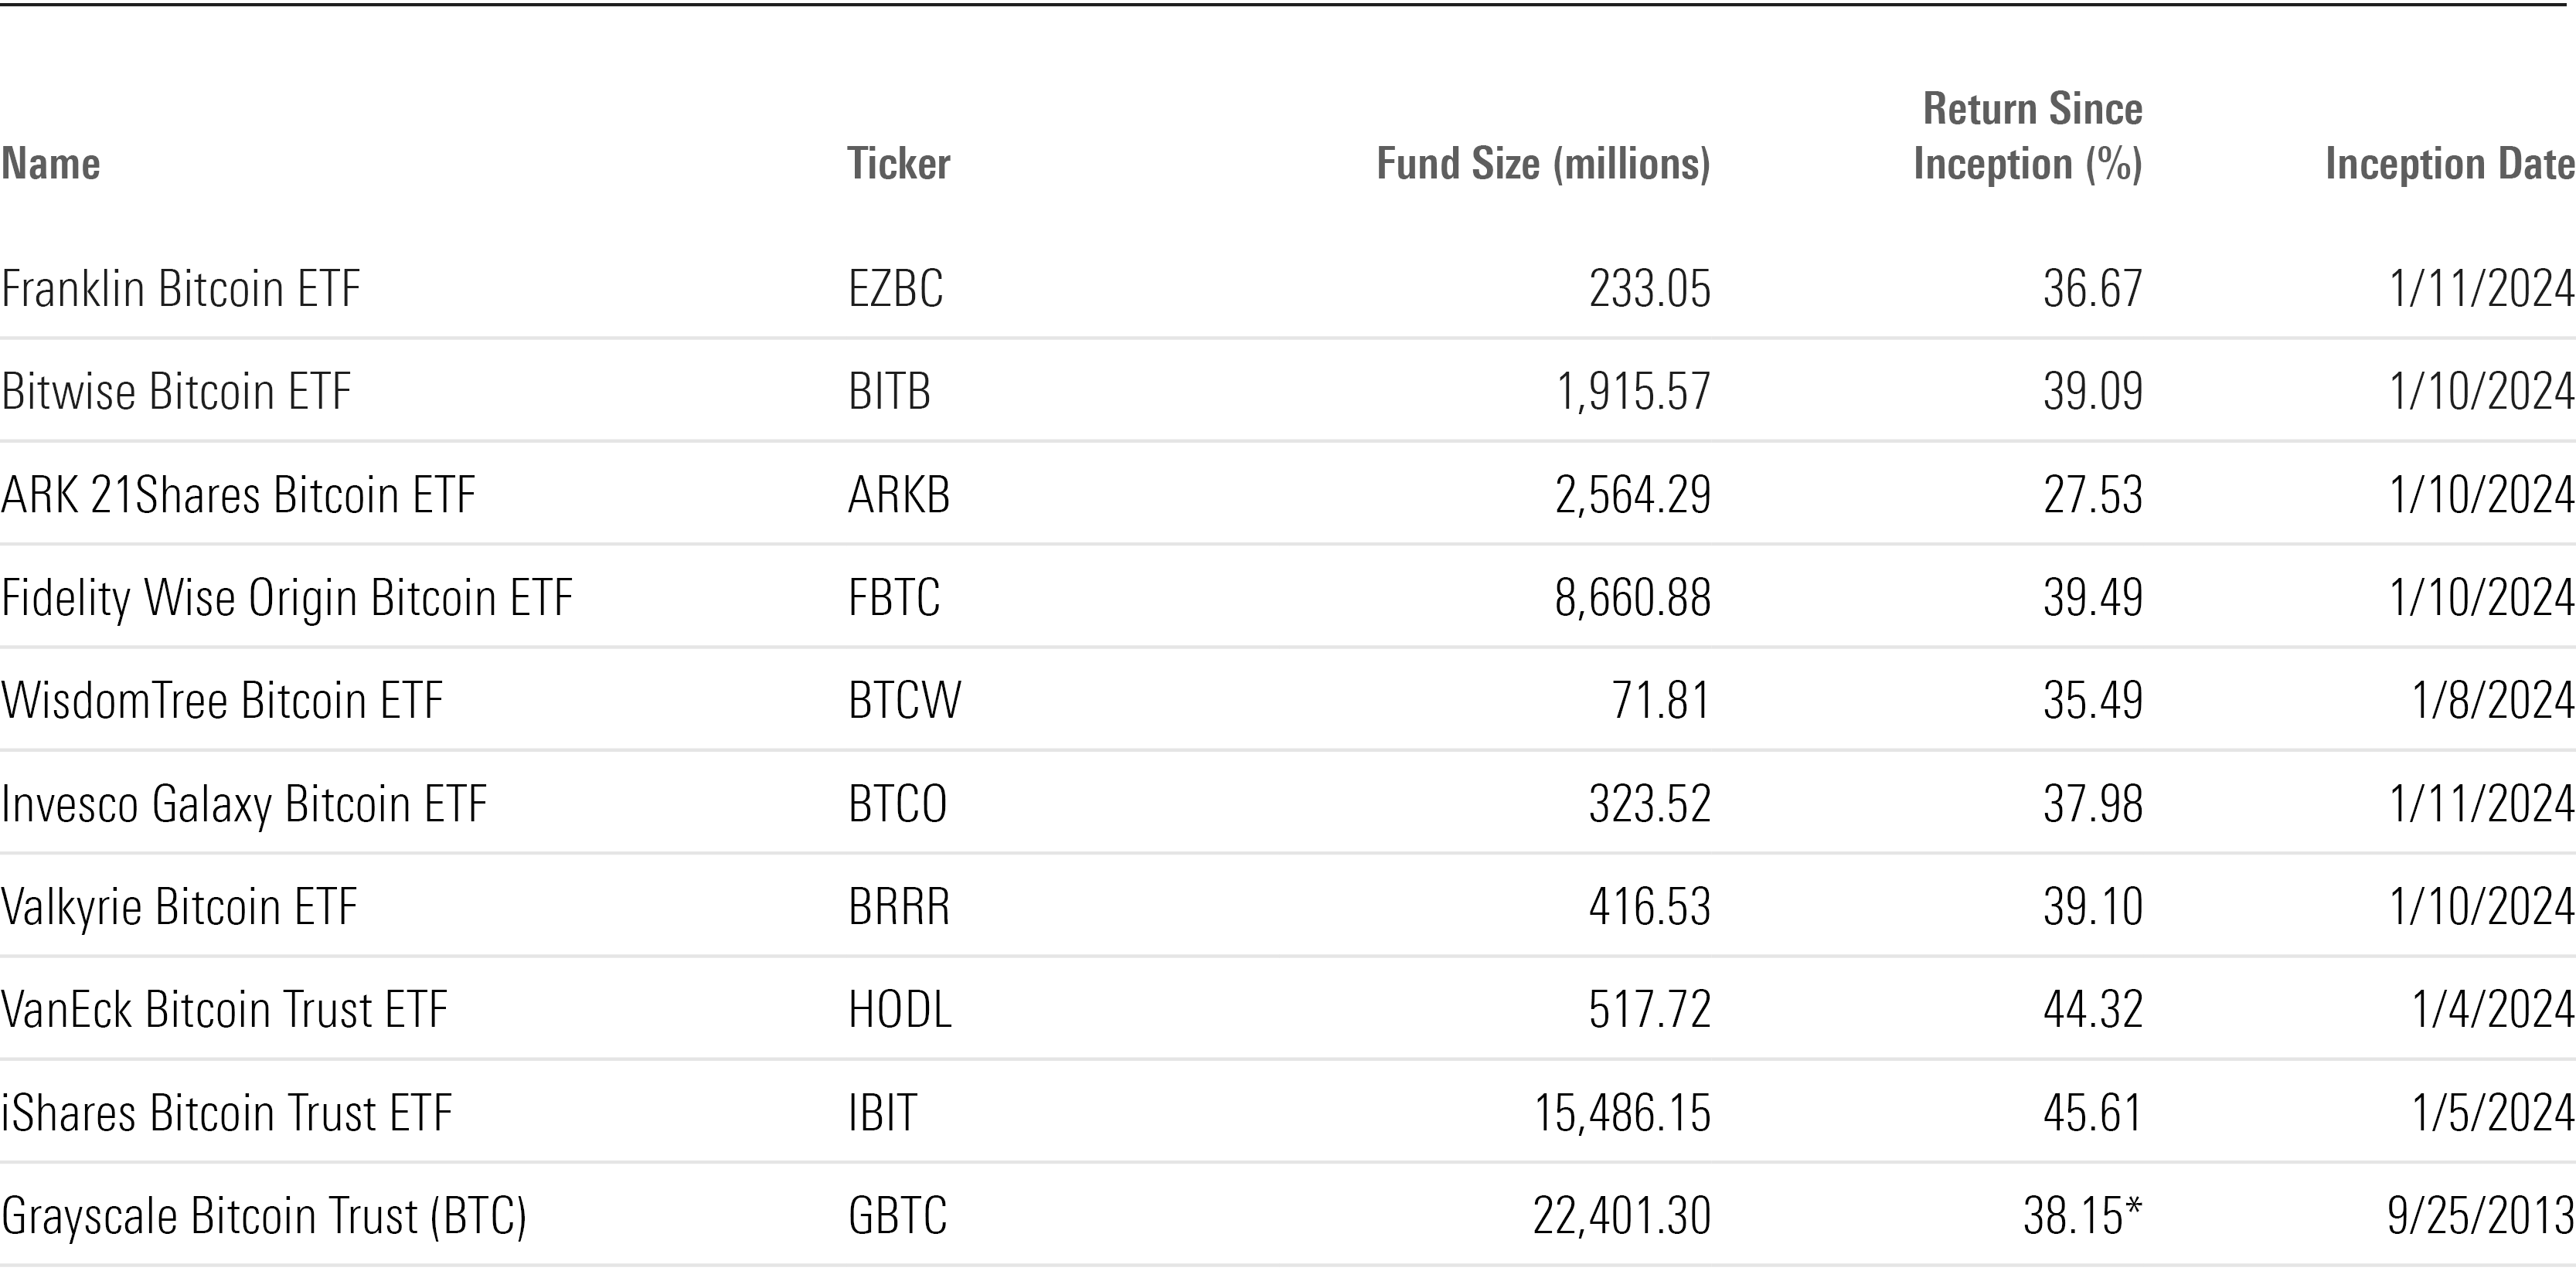 Table showing ticker, fund size, and since inception return for 10 bitcoin ETFs.